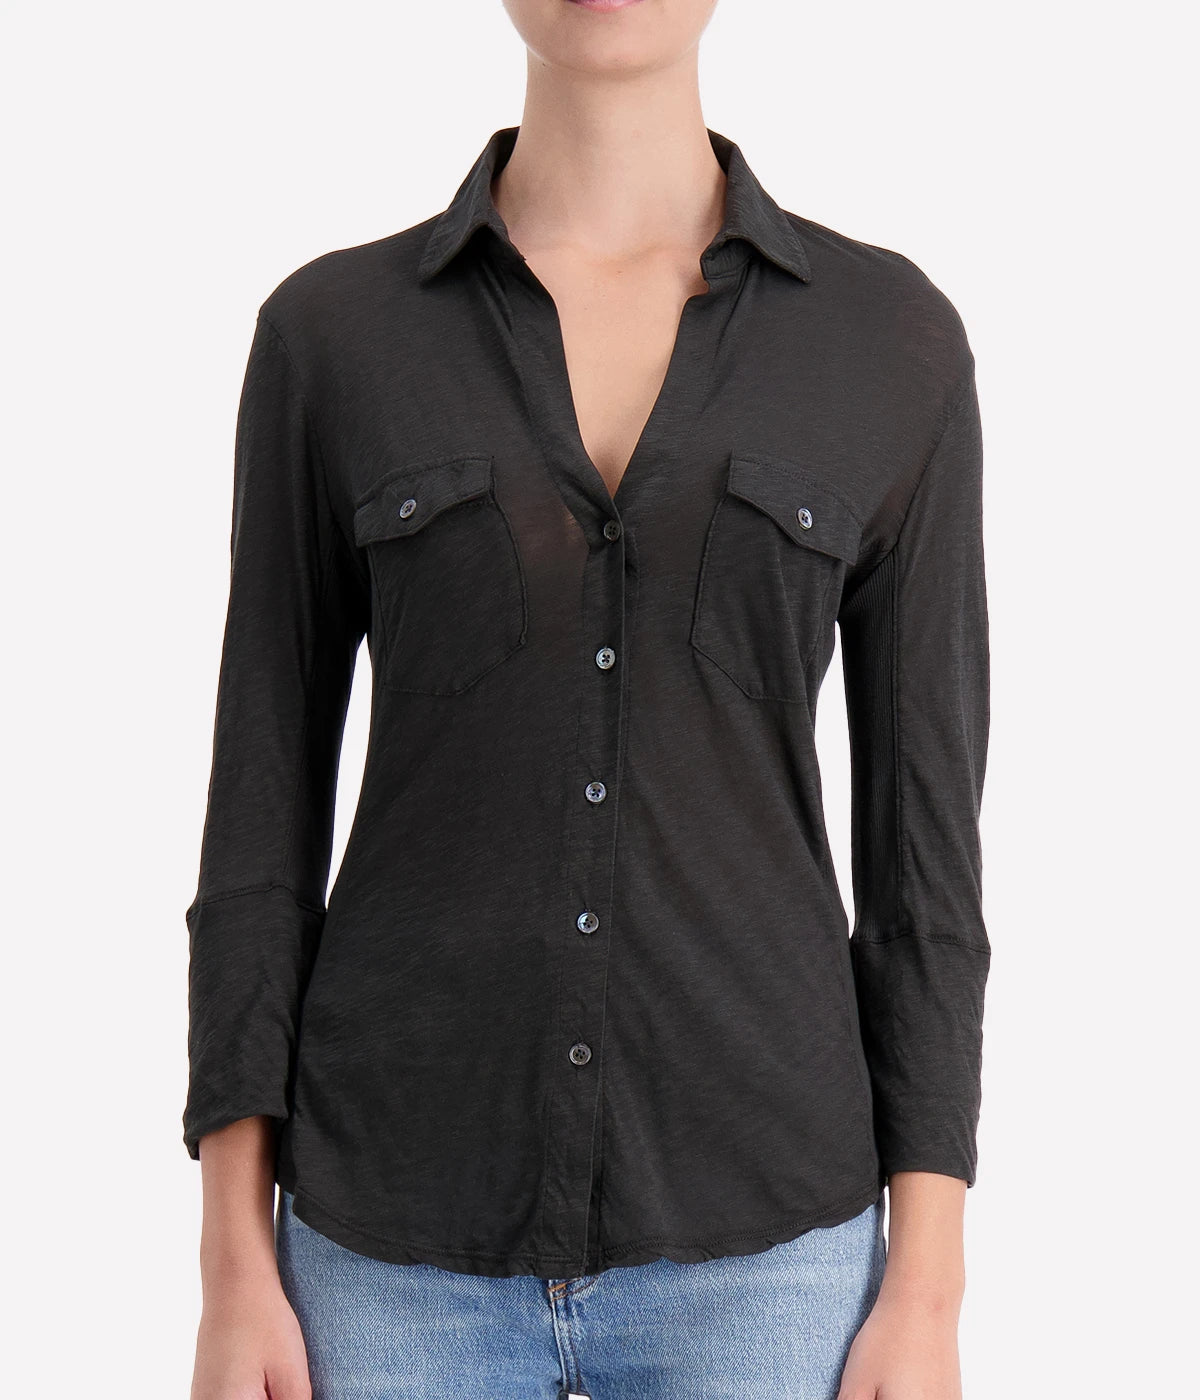 Contrast Panel Shirt in Carbon